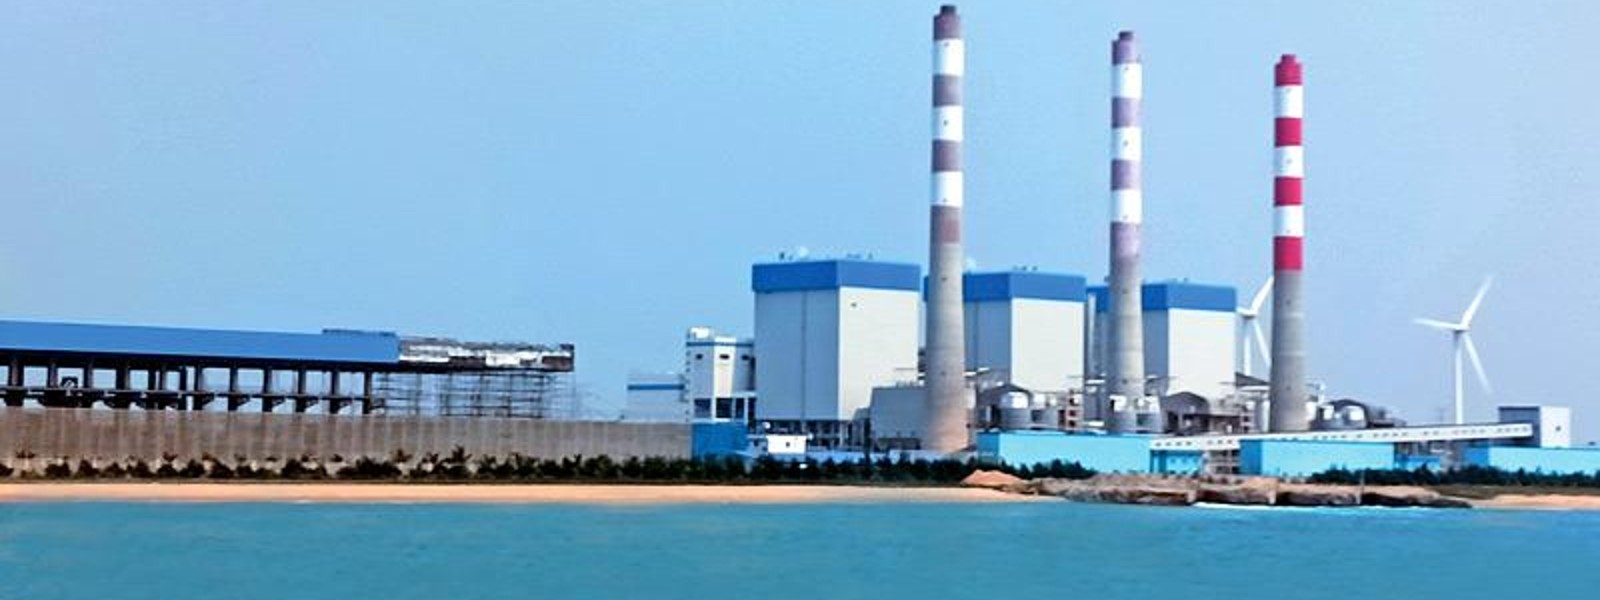 Norochcholai power plant fully restored: Minister